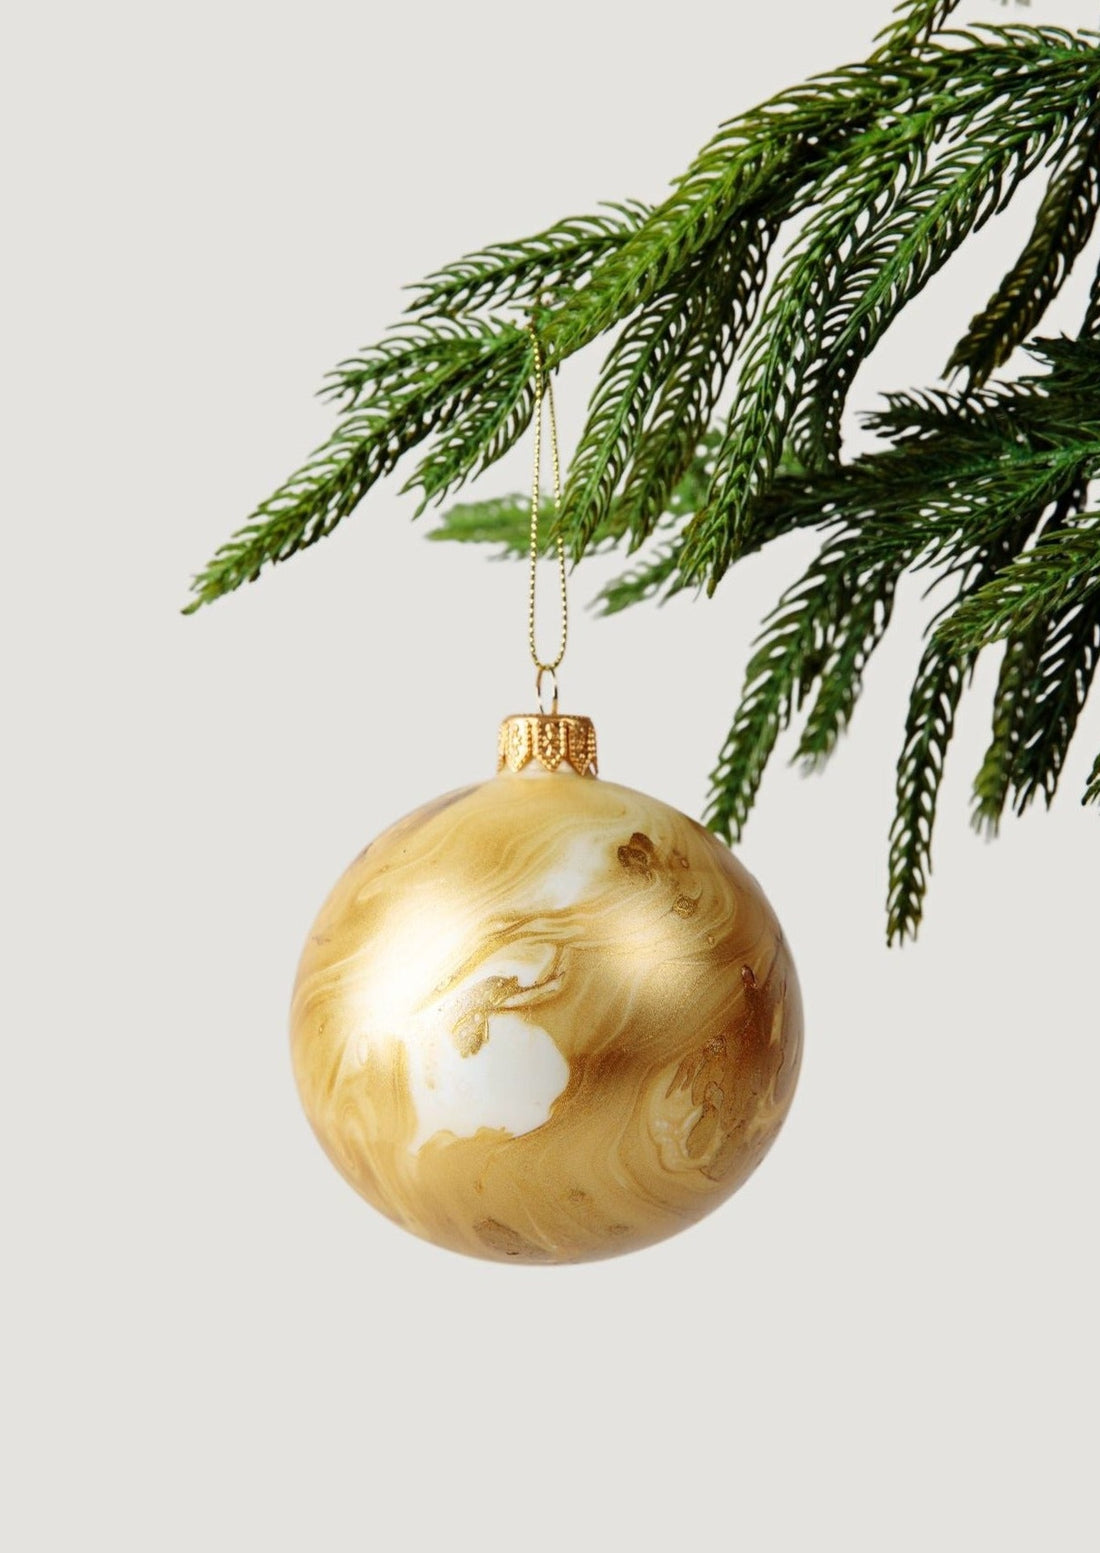 Mouth-Blown Glass Bulb Ornament in Gold Marble Hanging on Faux Pine Tree Branch